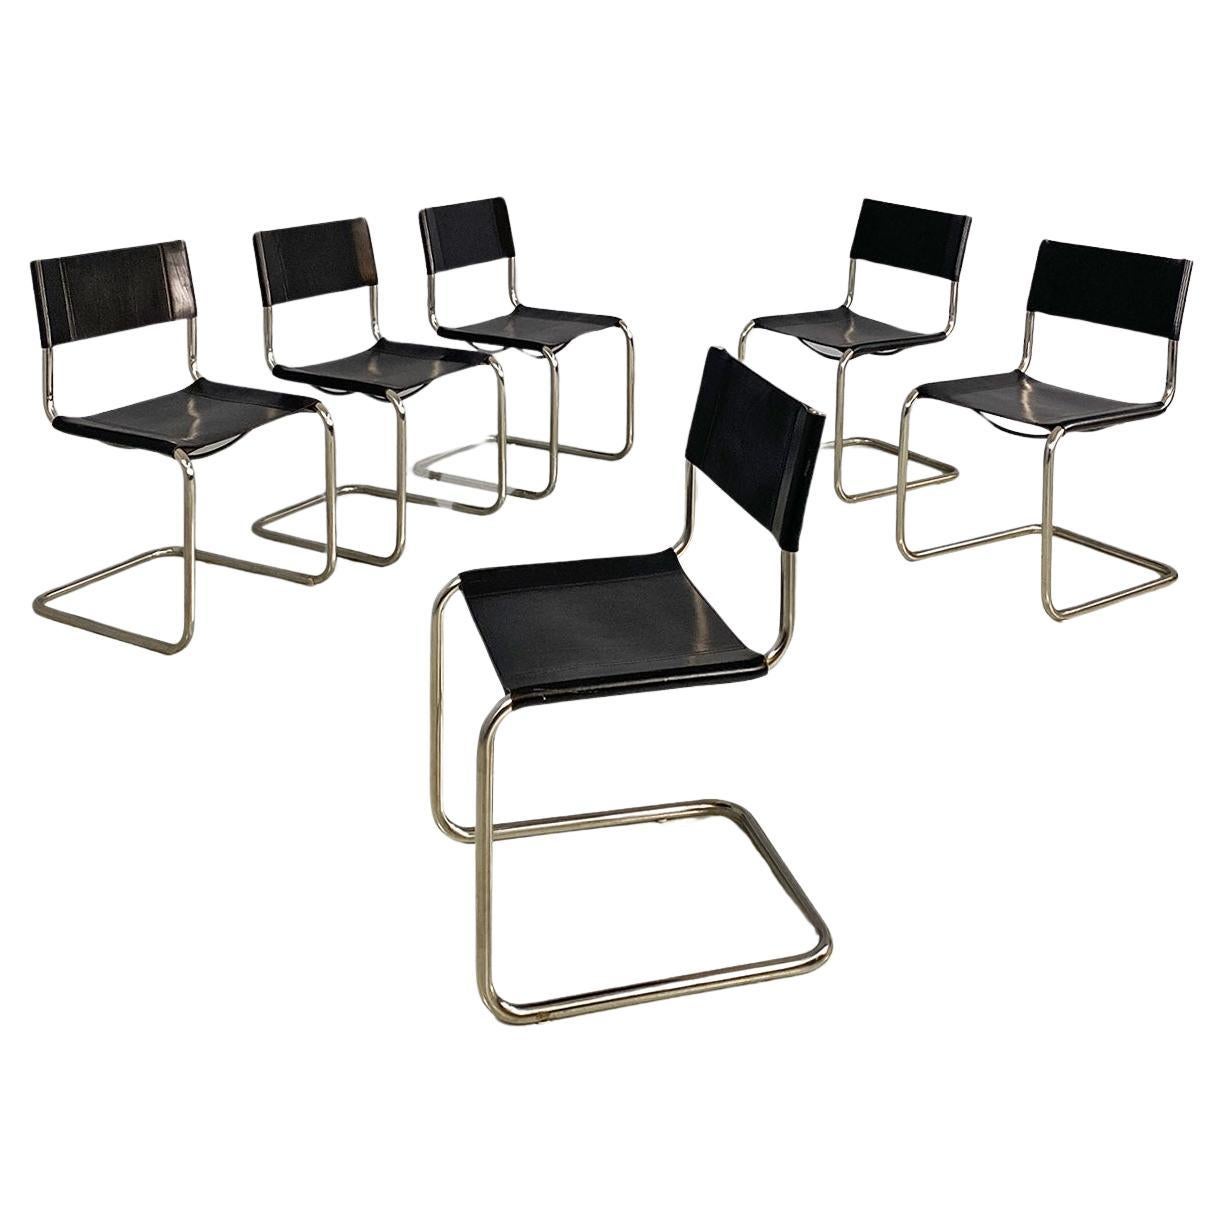 Italian modern black leather and tubolar chromed metal chairs by Zanotta, 1970s